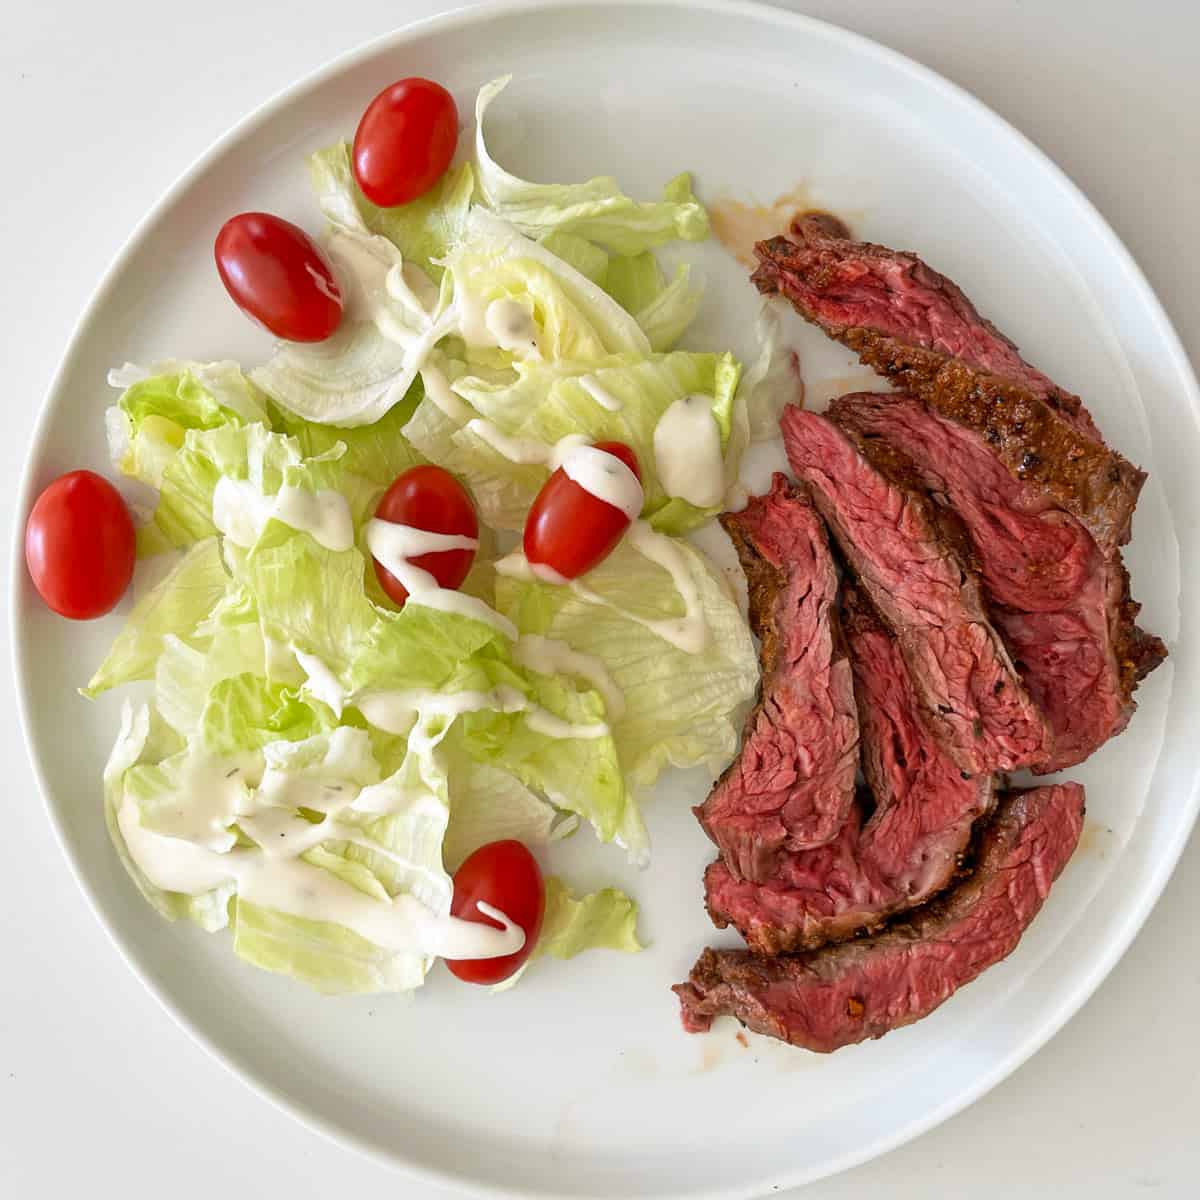 Skirt steak is served with a side salad.